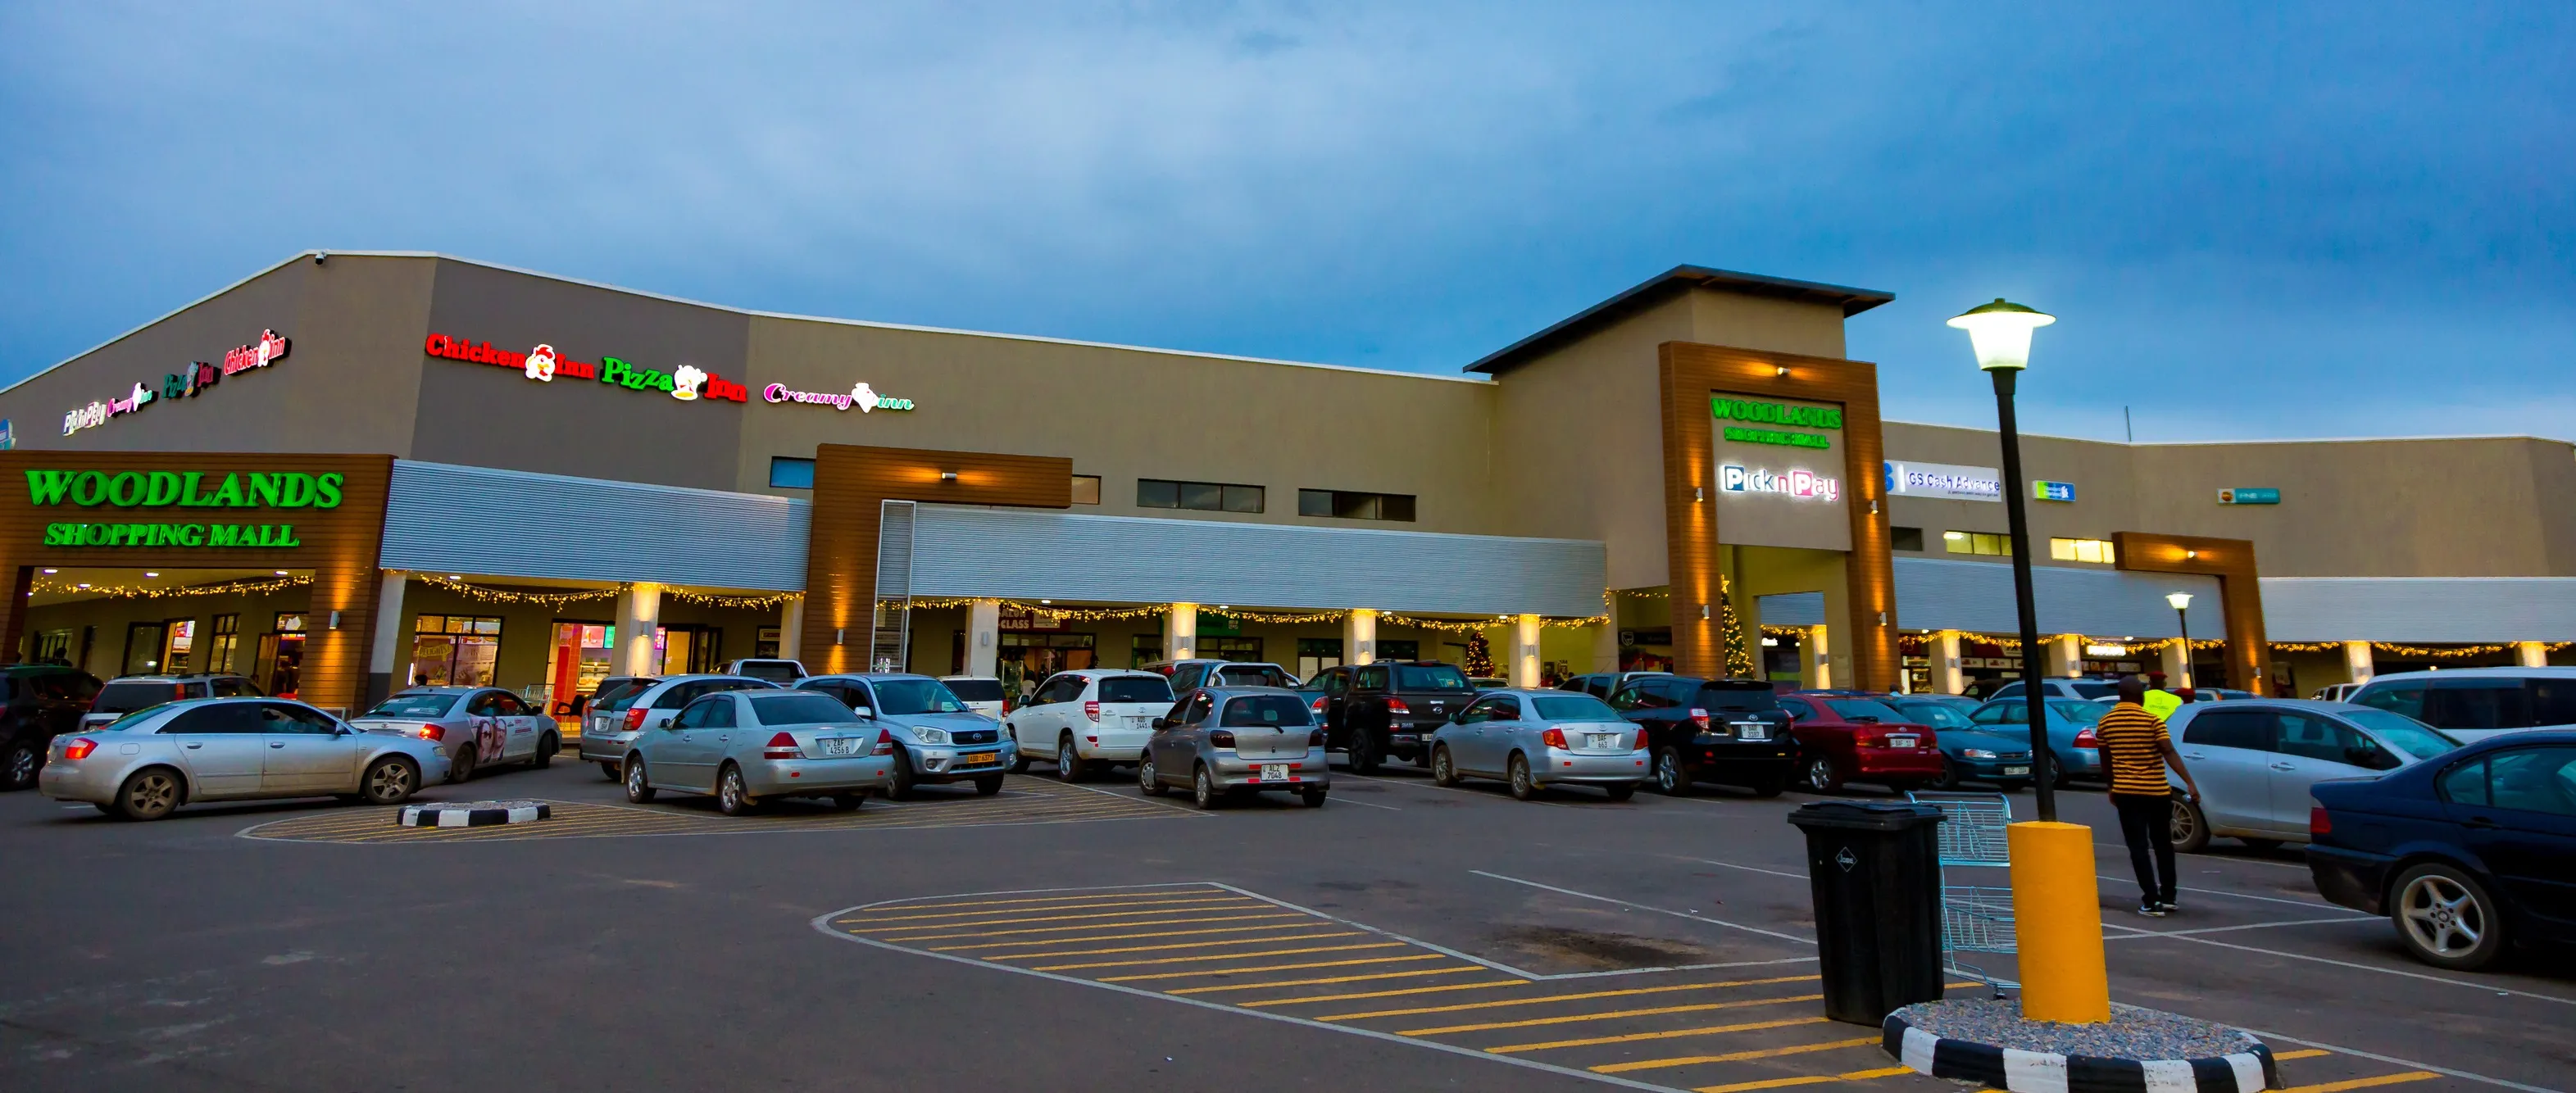 Woodlands Mall in Zambia, africa | Handbags,Shoes,Accessories,Clothes,Home Decor,Watches - Country Helper